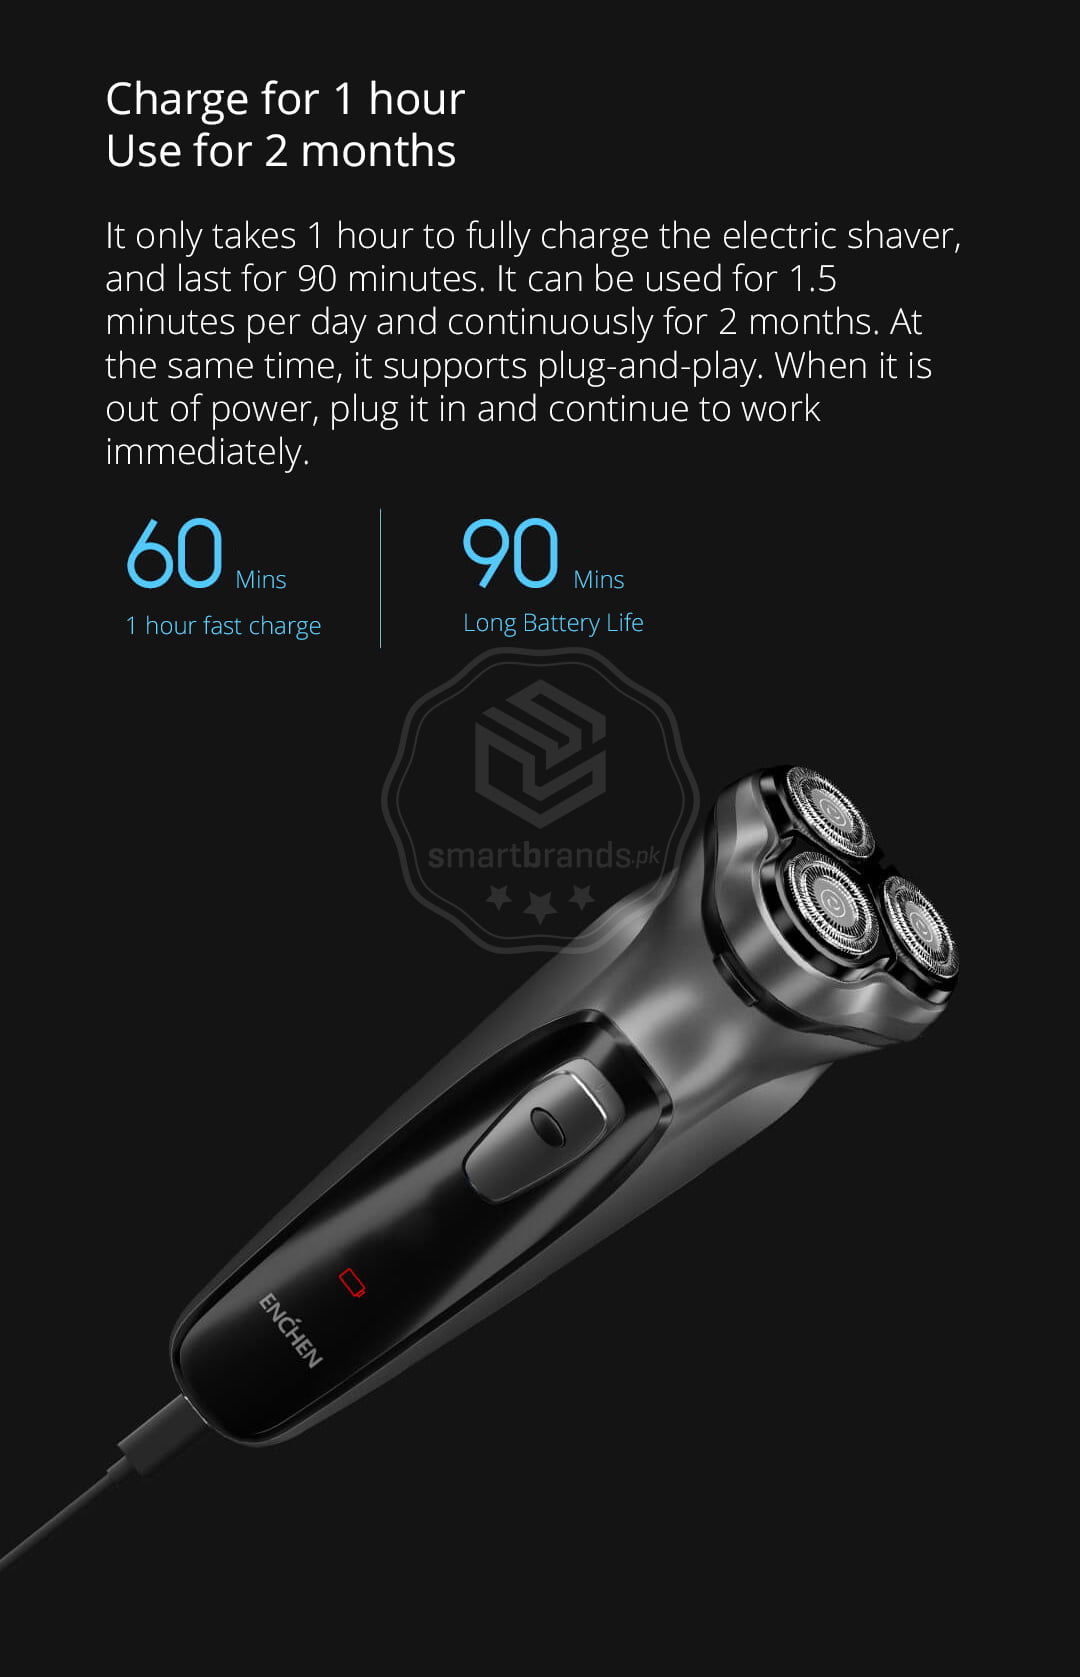 It only takes 1 hour to fully charge the electric shaver, and last for 90 minutes. It can be used for 1.5 minutes per day and continuously for 2 months. At the same time, it supports plug-and-play. When it is out of power, plug it in and continue to work immediately.